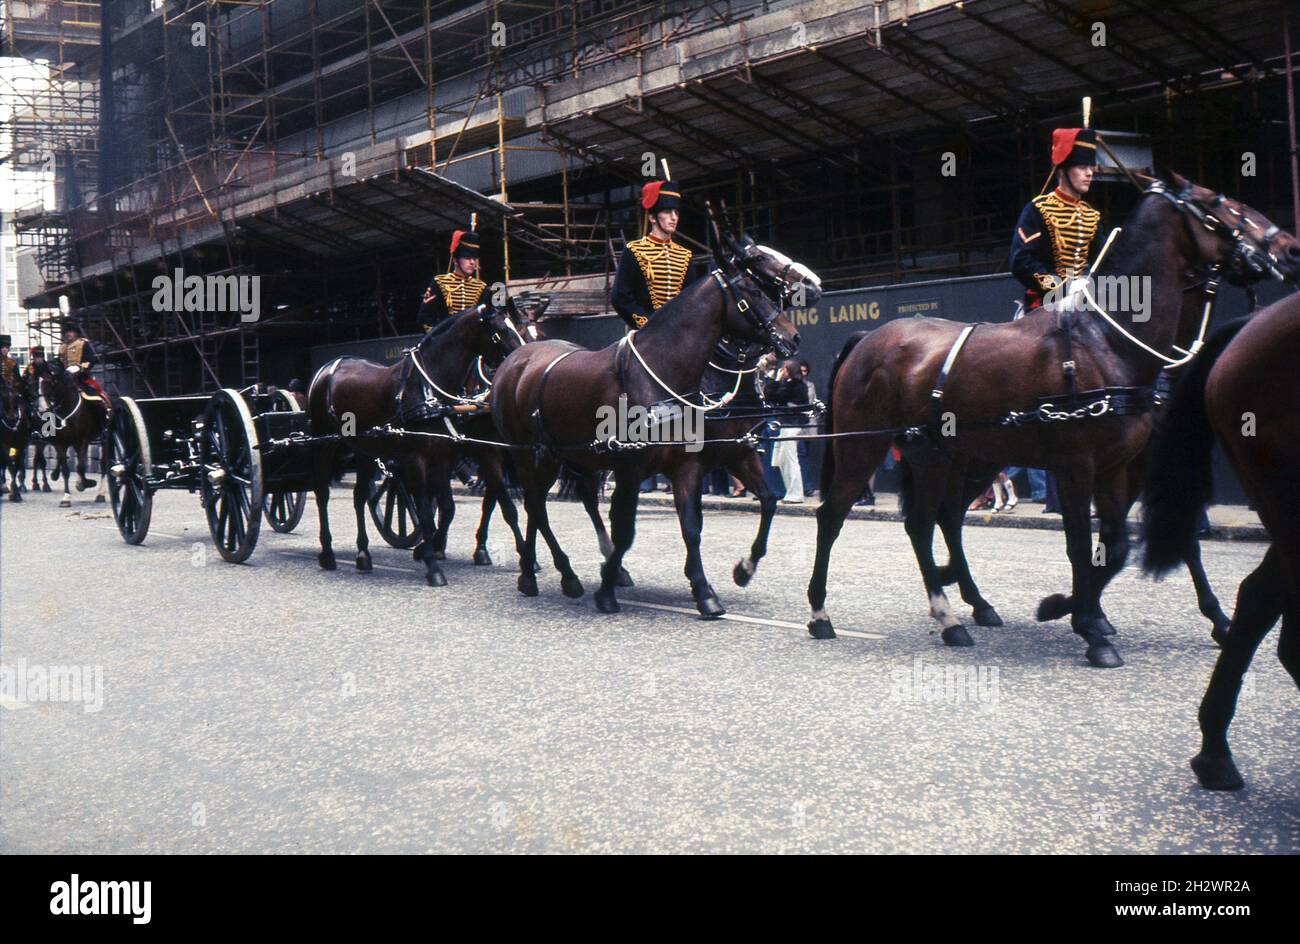 Members of the King’s Troop, Royal Horse Artillery en-route from their barracks in St. John’s Wood to Hyde Park, London in February 1977 to fire a ceremonial 21-gun Royal salute to herald the beginning of the Queen’s Silver Jubilee Year. The team of six horses, ridden by three ‘drivers’ are pulling one of the troop’s First World War-era QF 13-pounder guns and its limber. Stock Photo